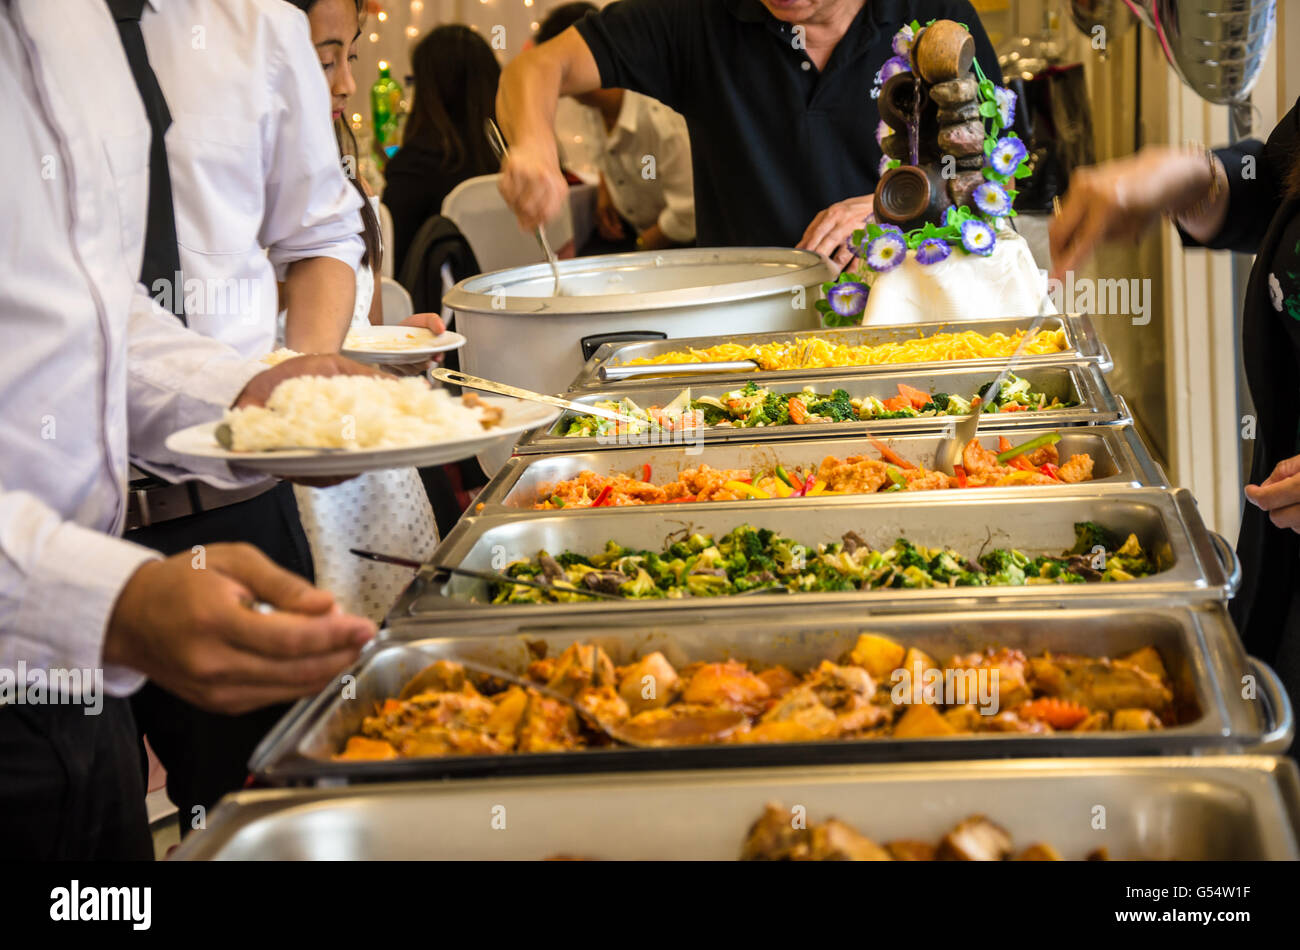 People help themselves to food at a self-service buffet at a party. Stock Photo